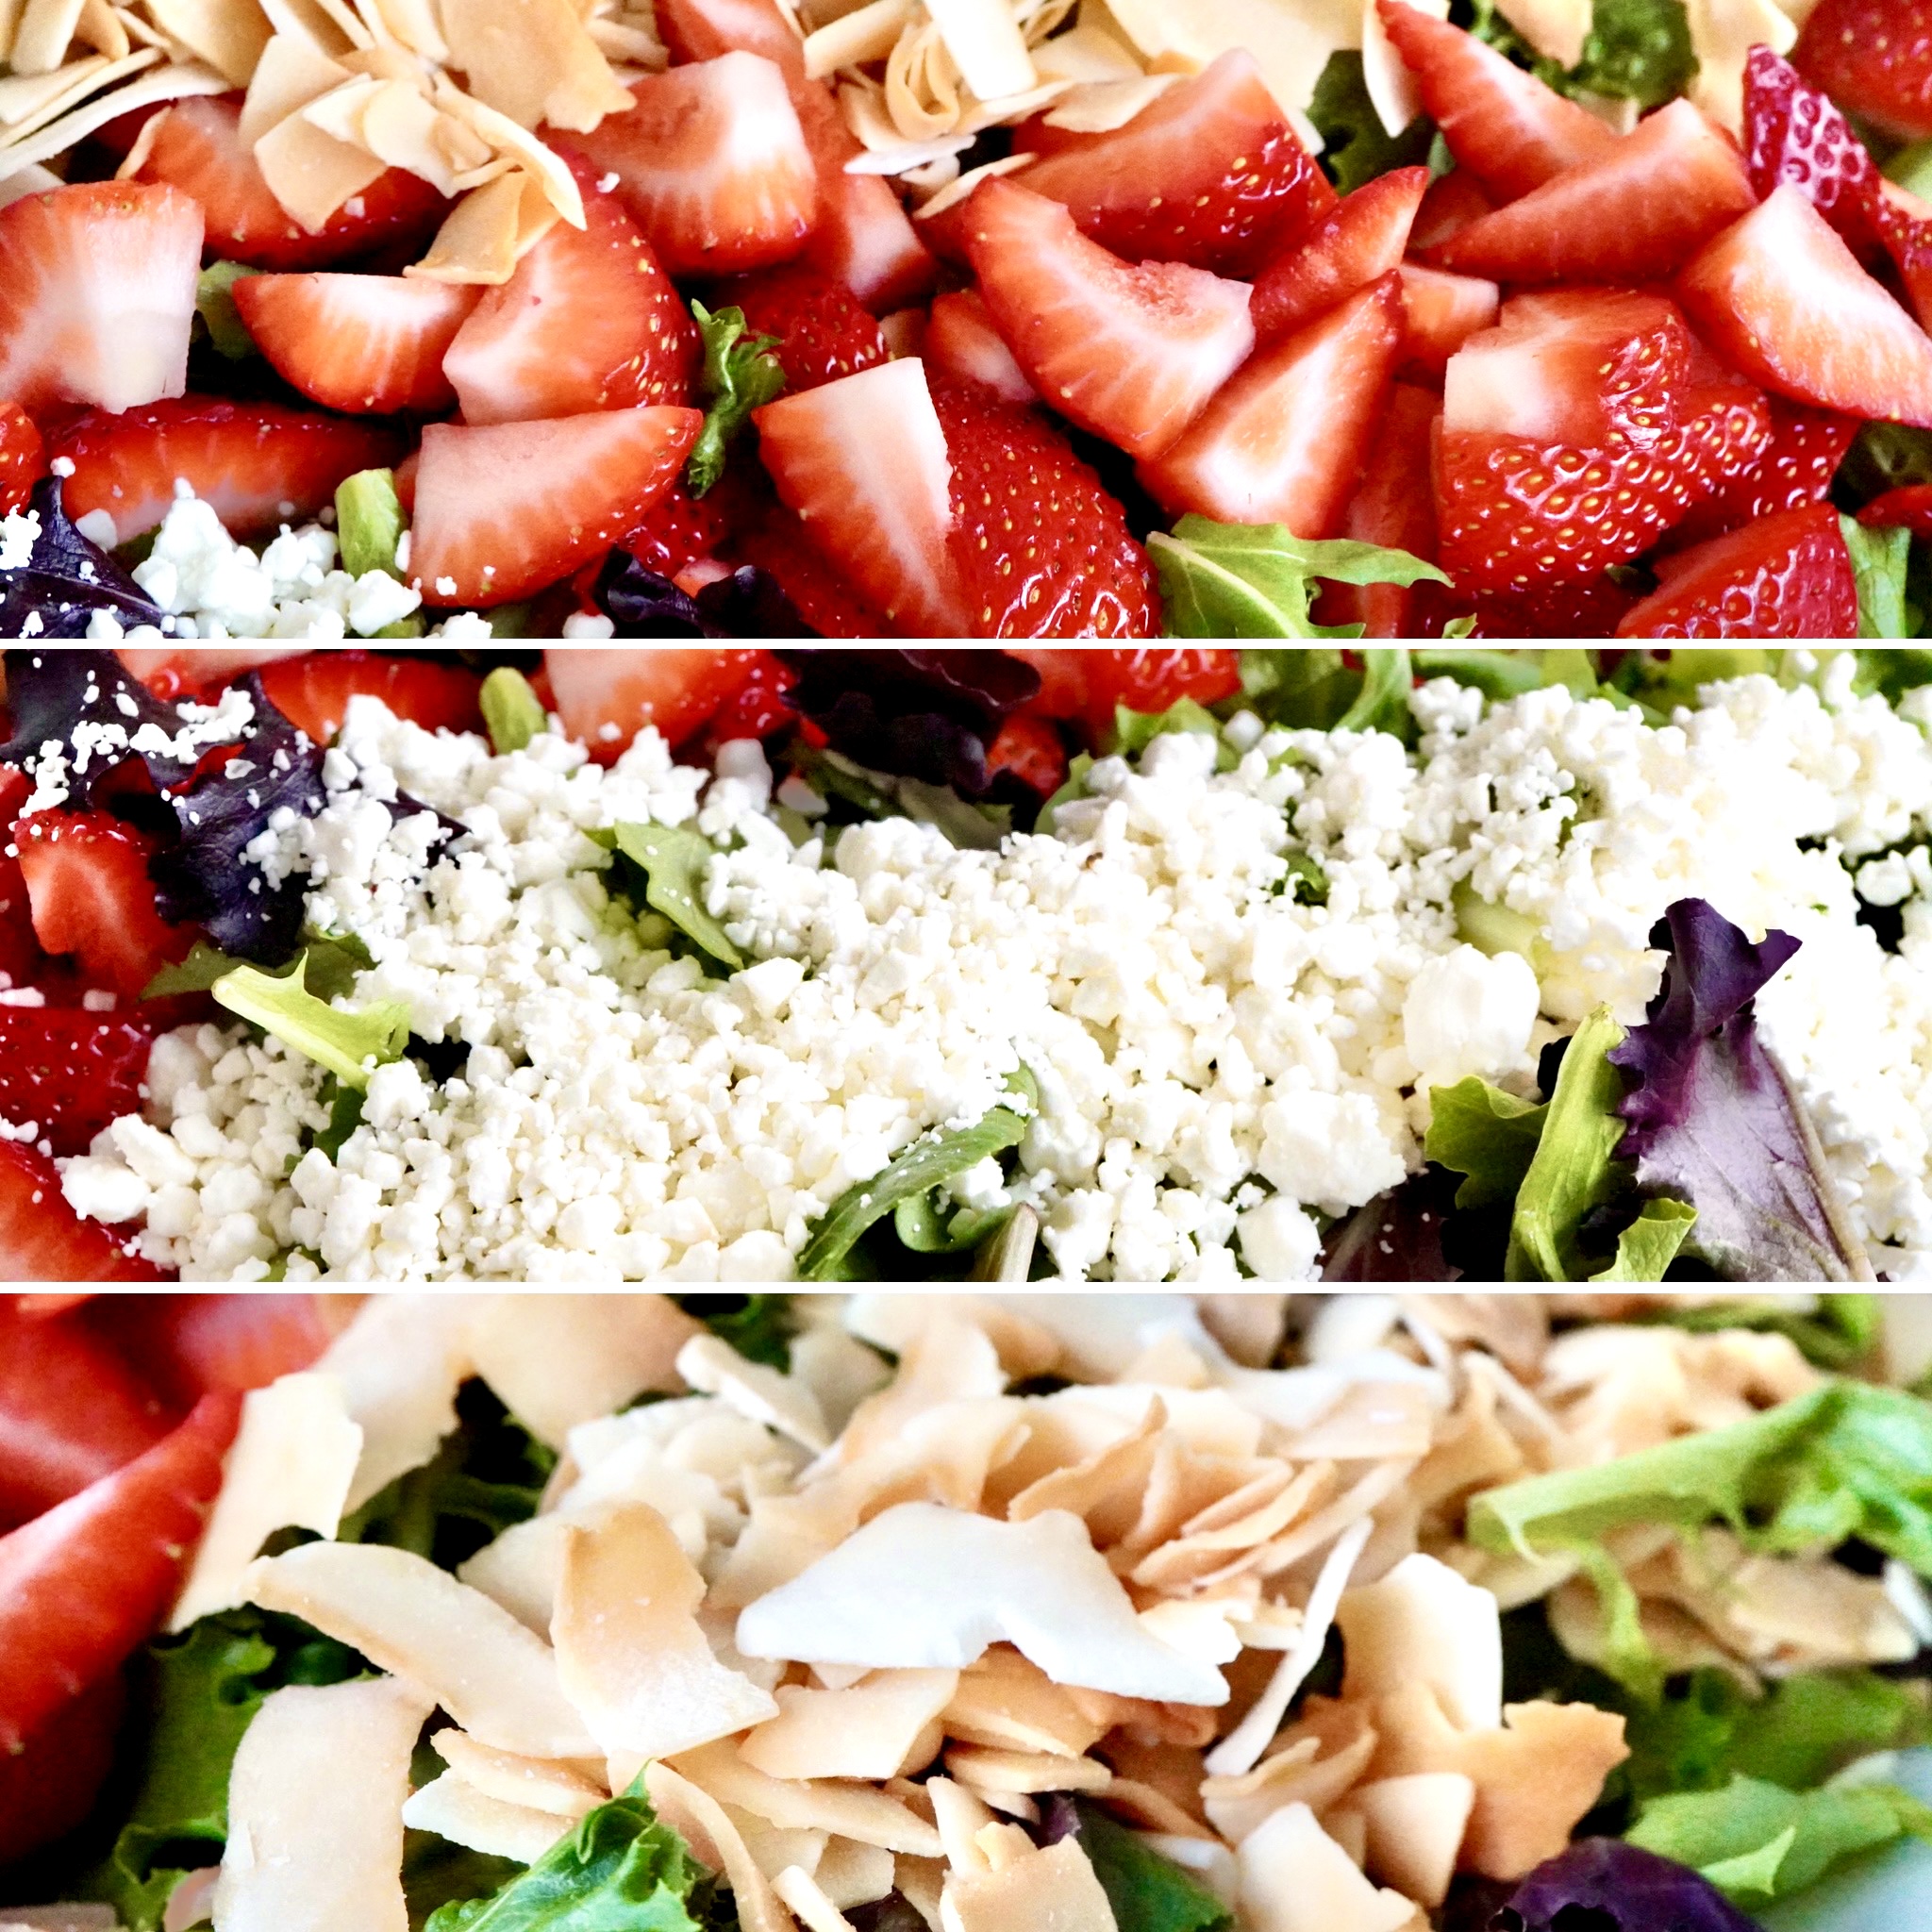 strawberries, goat cheese and coconut flakes over mixed greens